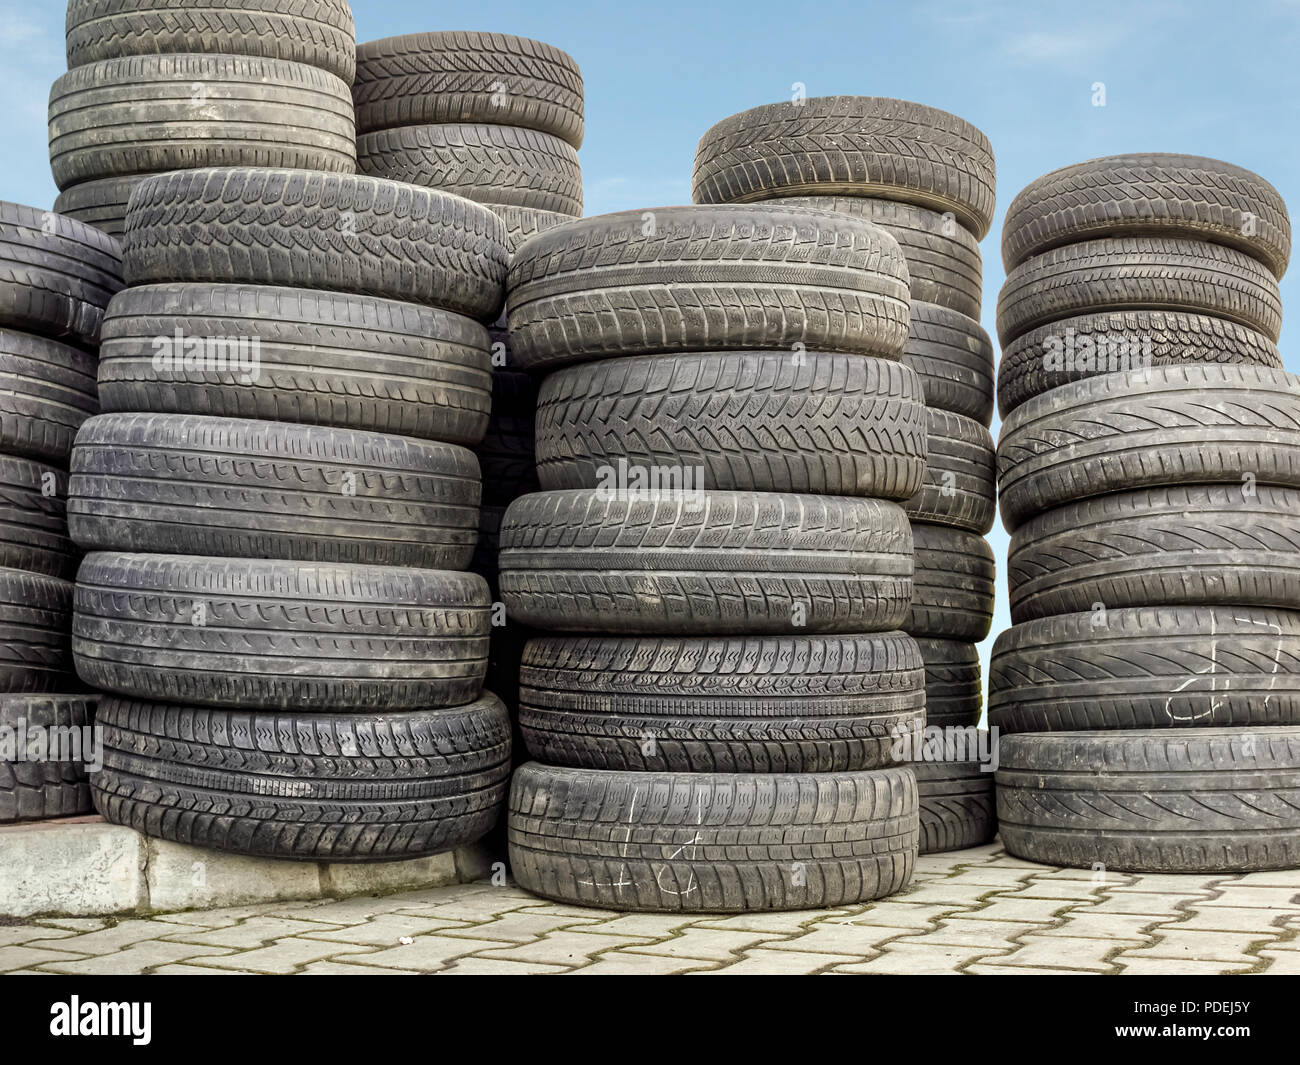 Piled used and worn car tires Stock Photo